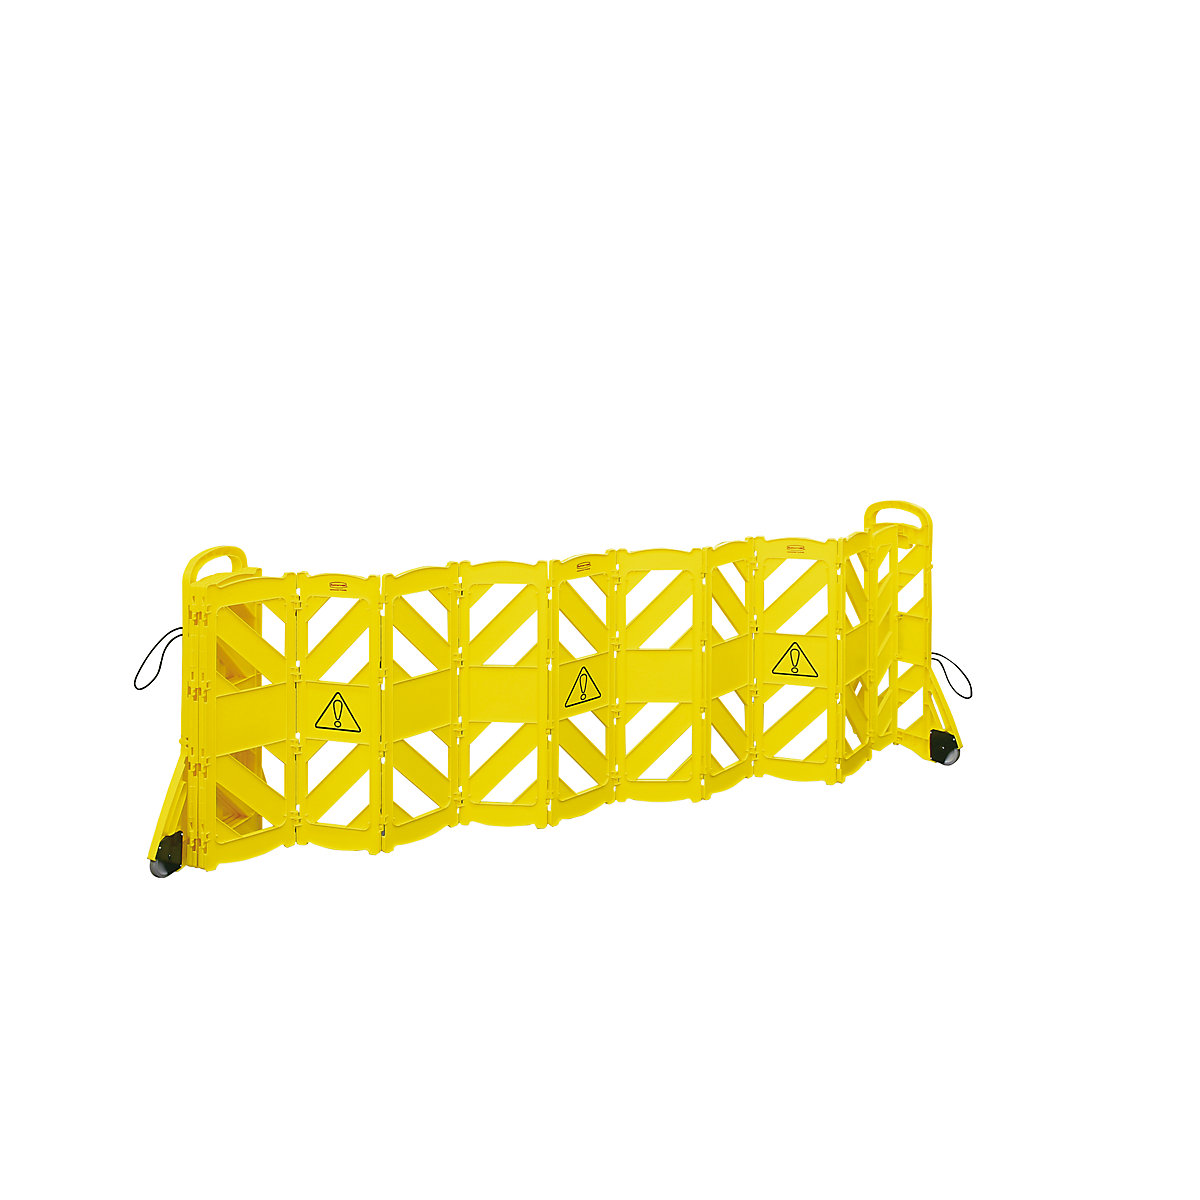 Rubbermaid – Barrier fence made of polyethylene, mobile, with 16 mobile sections, collapsible